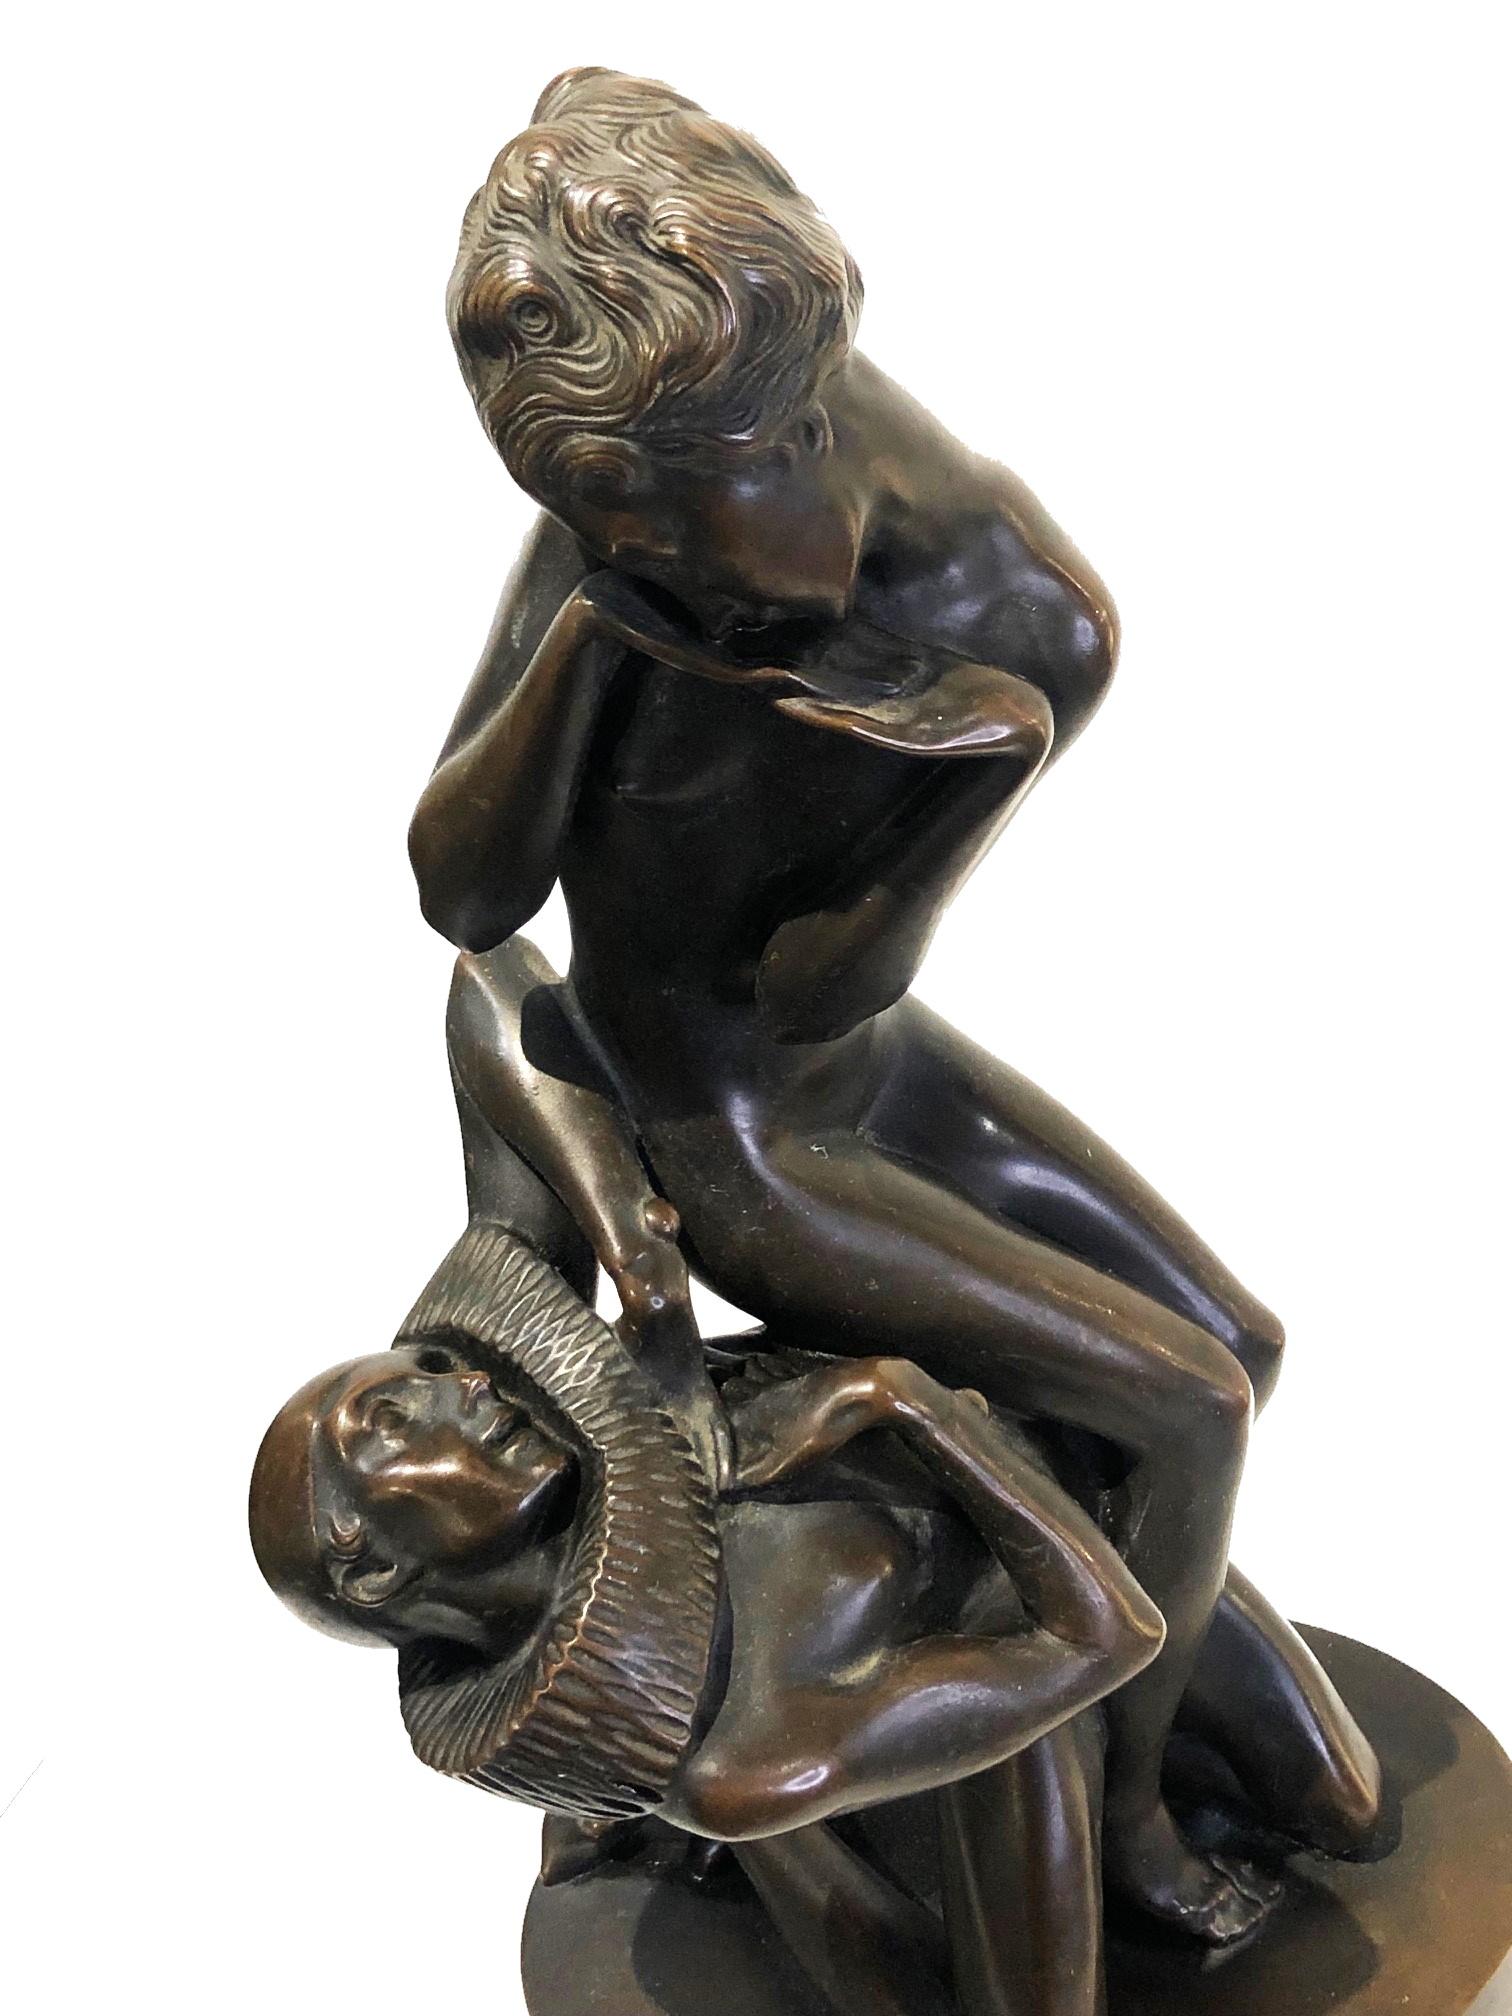 Art Deco
Heinrich Karl Scholz 
Declaration of Love 
Patinated Bronze Sculpture
Austria, 1919

DIMENSIONS
Height: 13.75 inches                   
Width: 6.75 inches                  
Depth: 4.75 inches

ABOUT
This Art Deco brown-patinated bronze